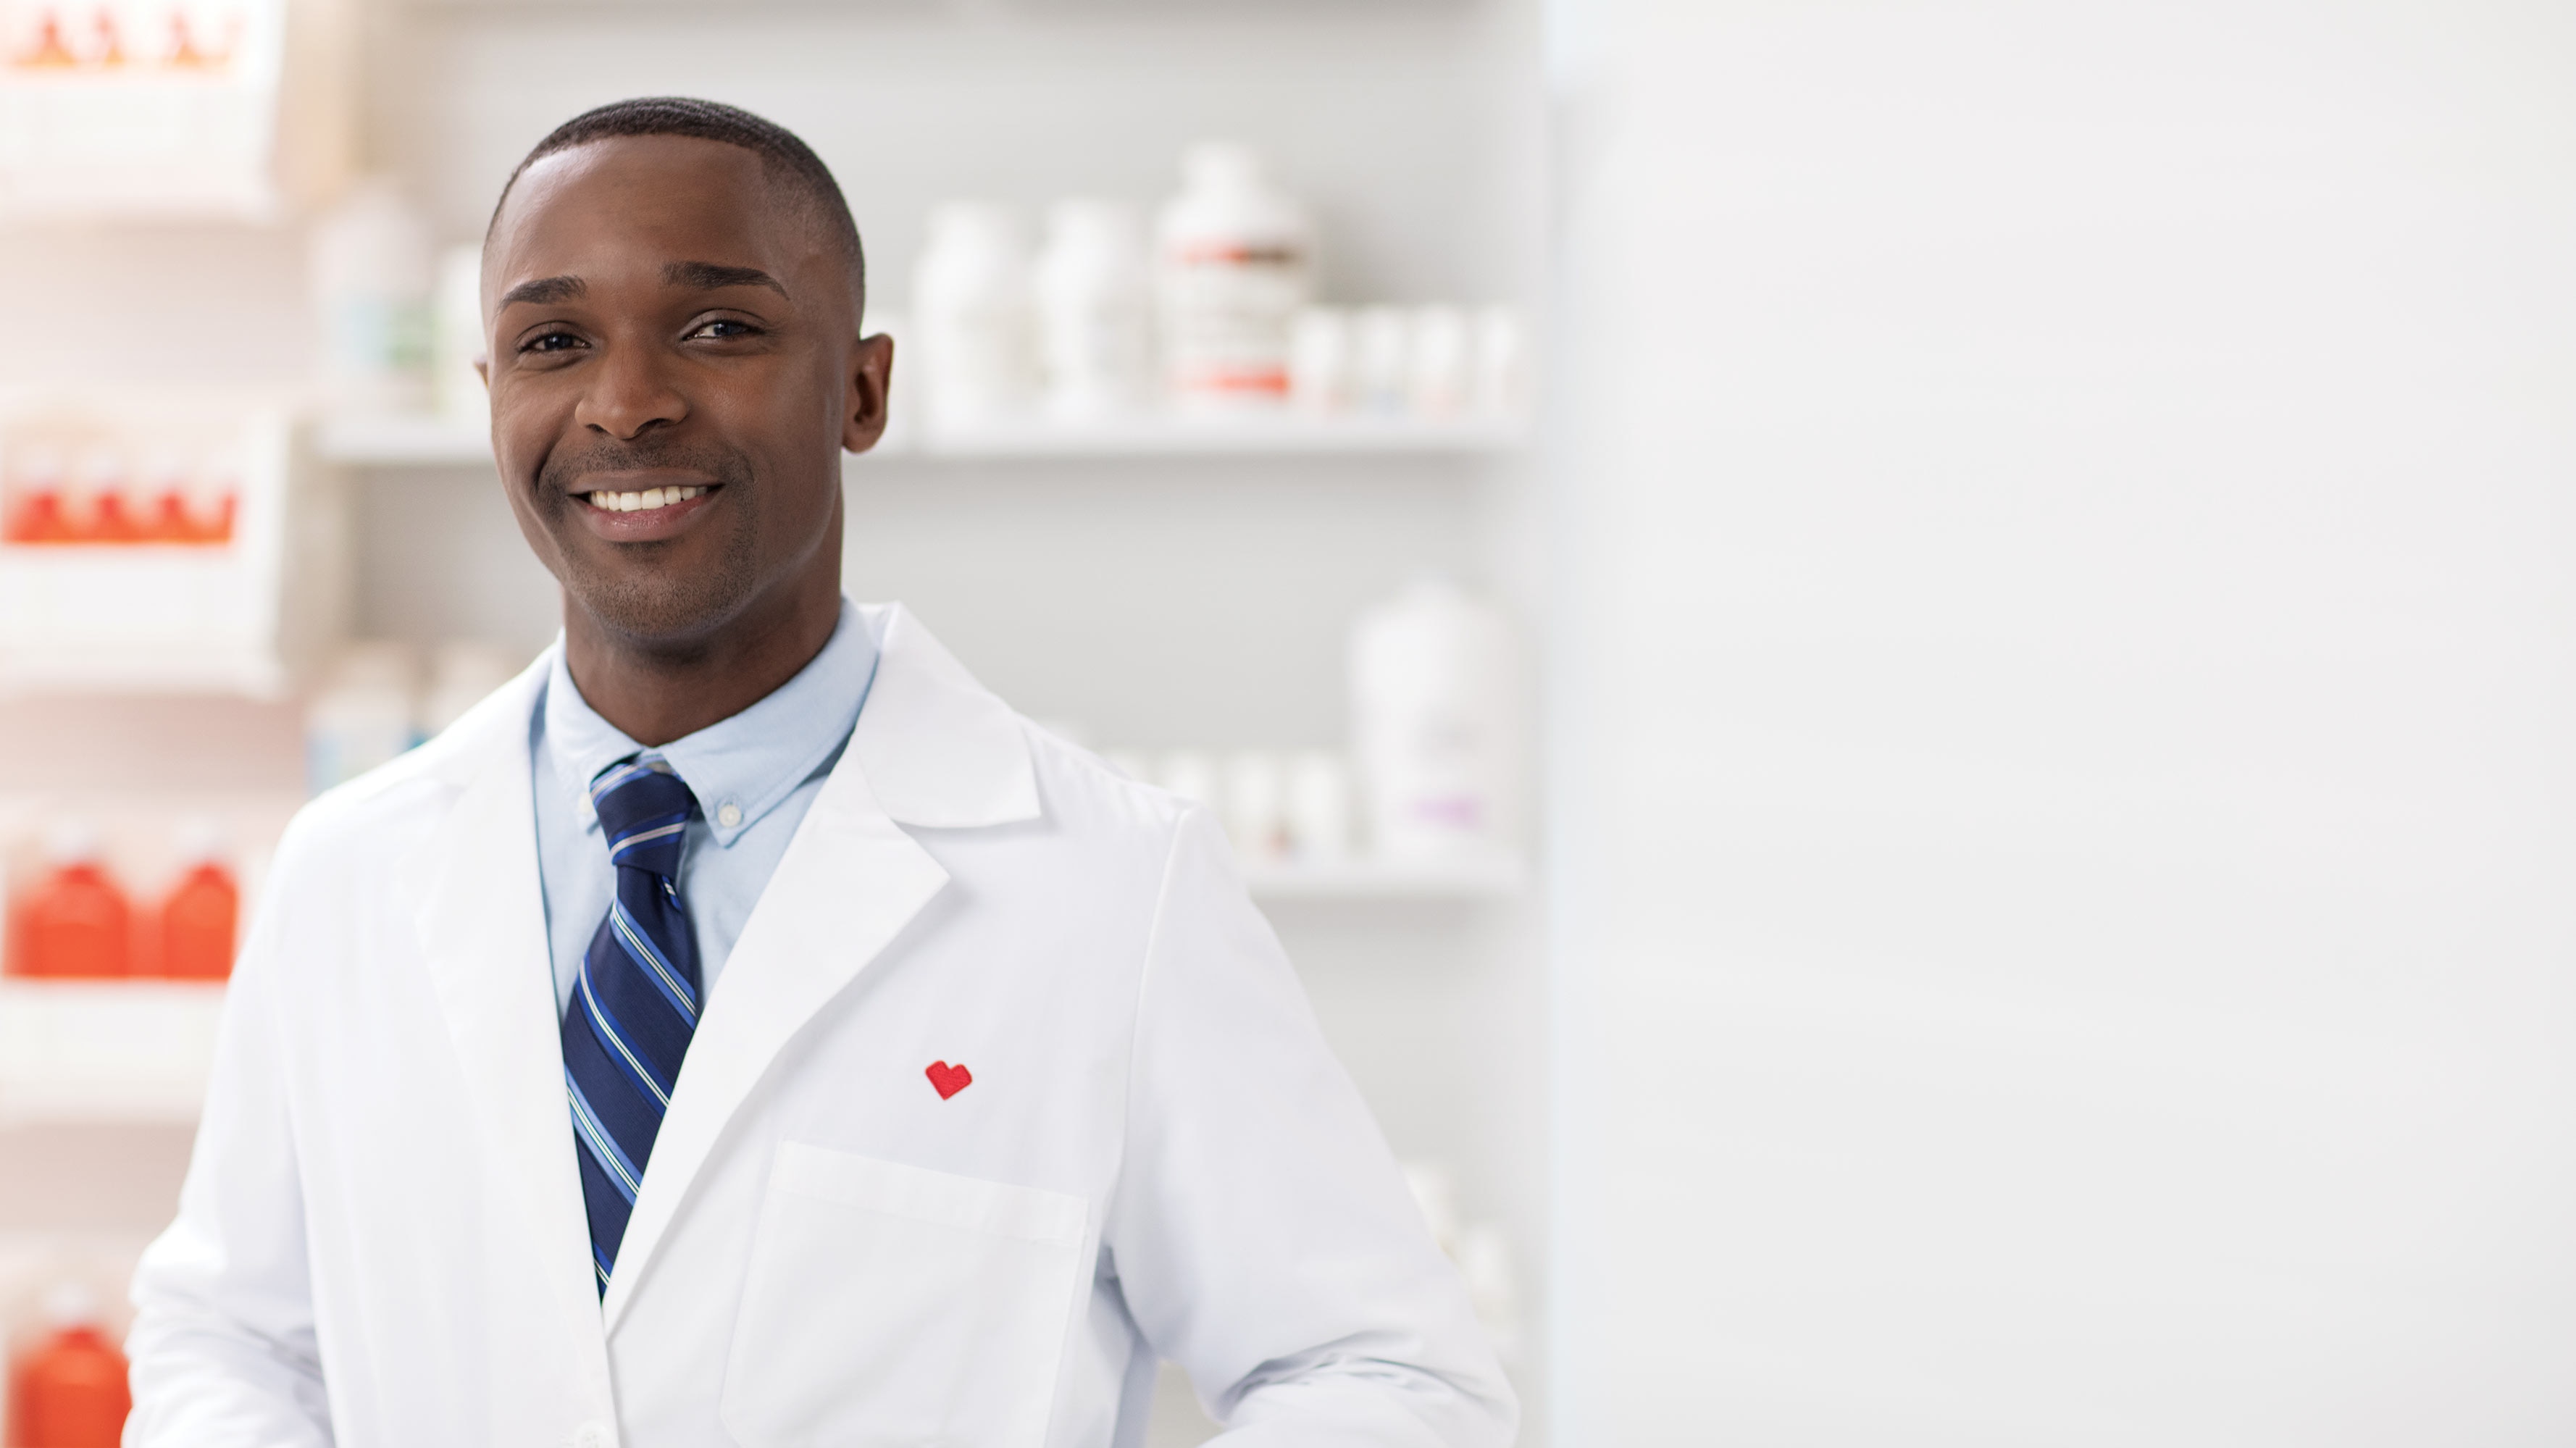 A pharmacist in a while lab coat, embroidered with a red CVS Health heart, smiles while standing behind the counter of a pharmacy.